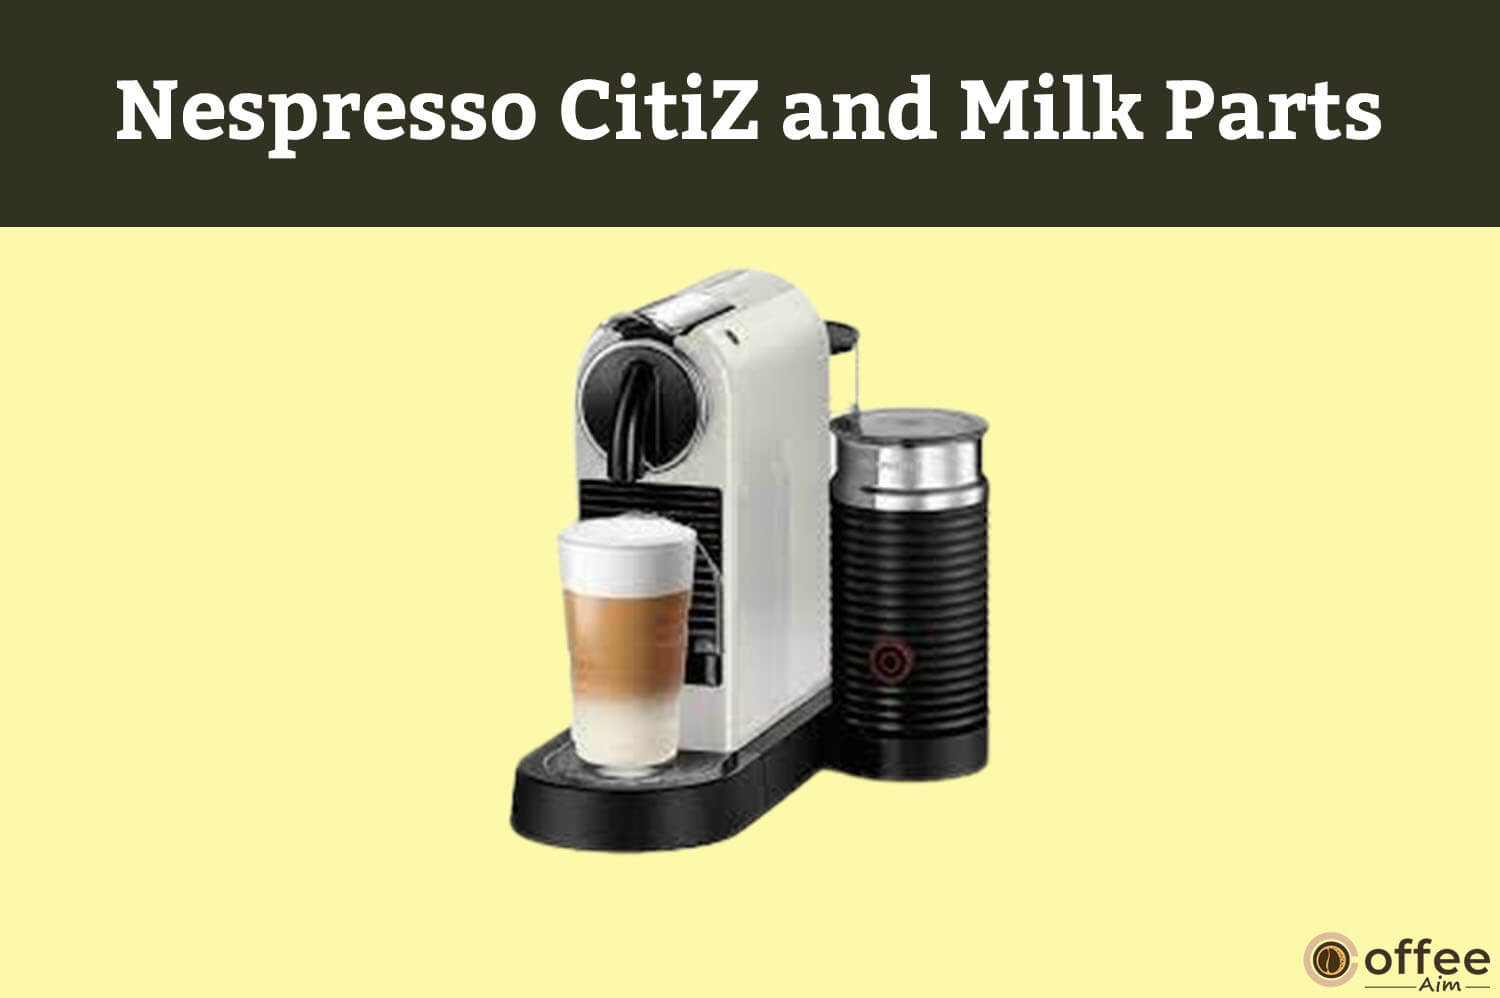 Featured image for the article "Nespresso CitiZ and Milk Parts"